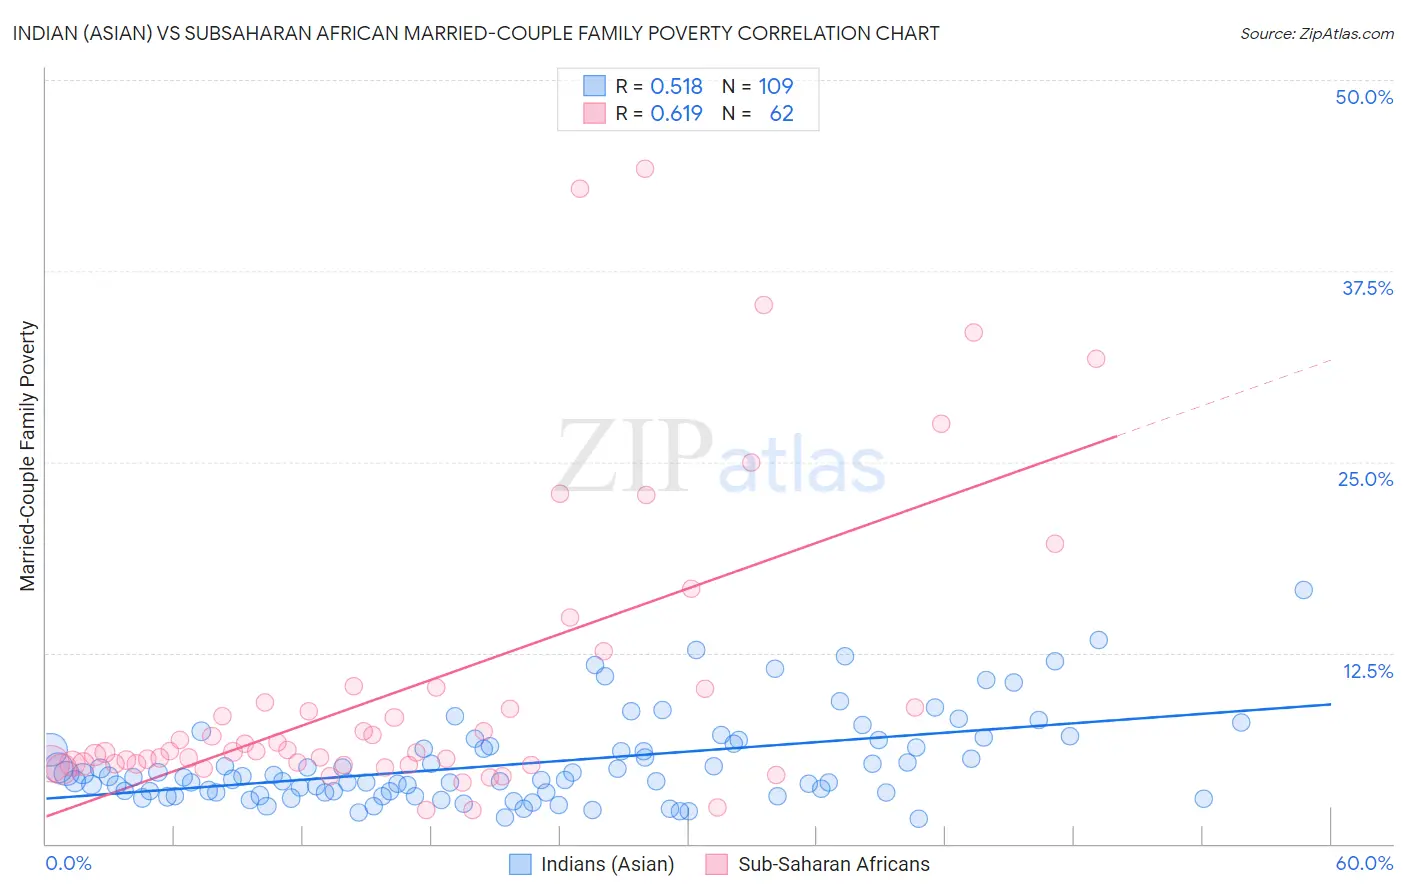 Indian (Asian) vs Subsaharan African Married-Couple Family Poverty